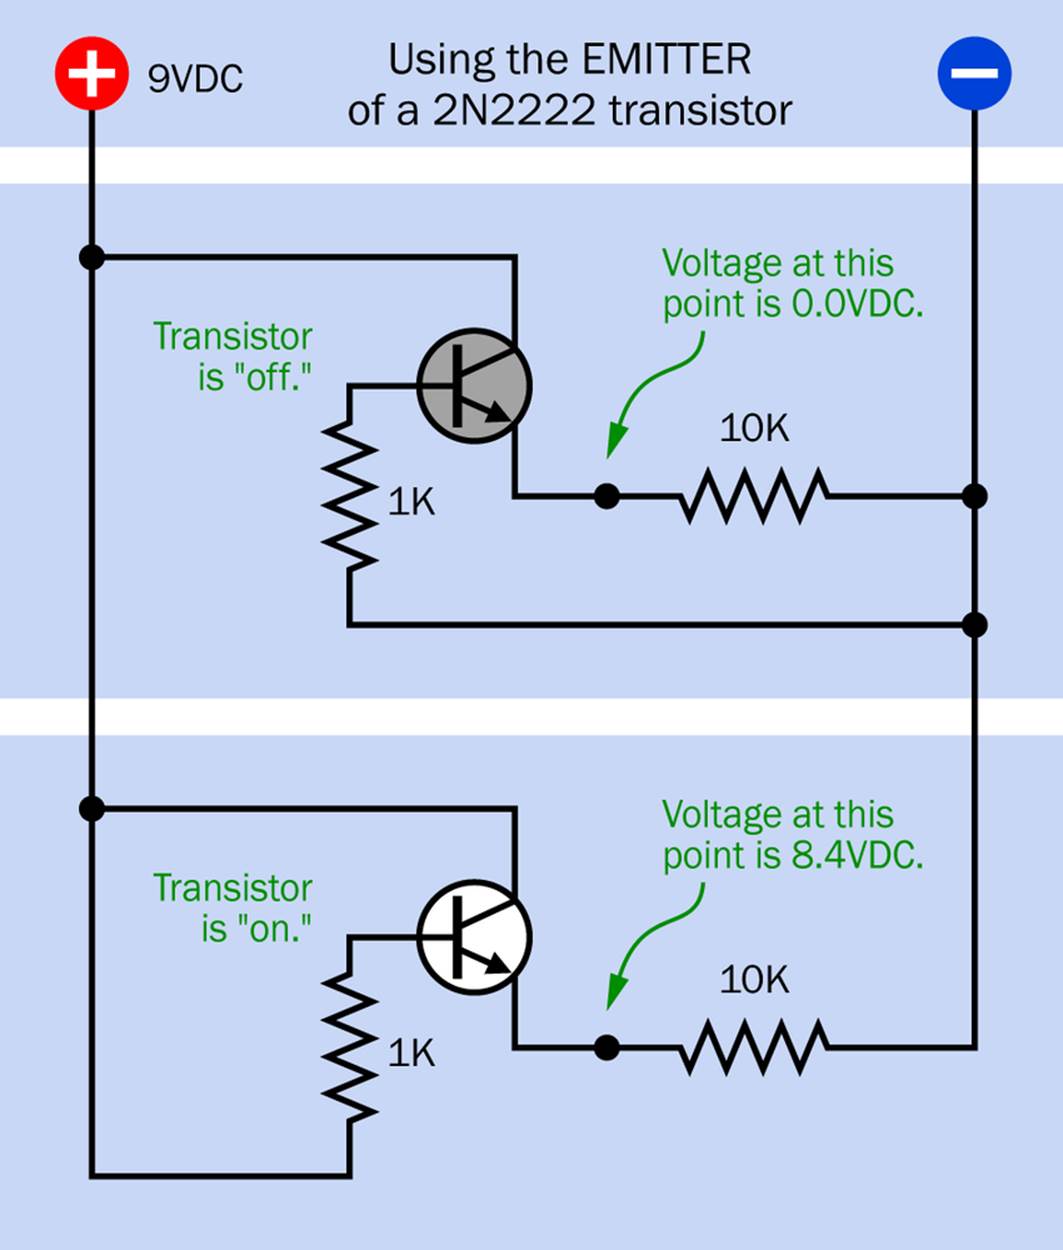 Actual values measured with a transistor configured to deliver output from the emitter side.